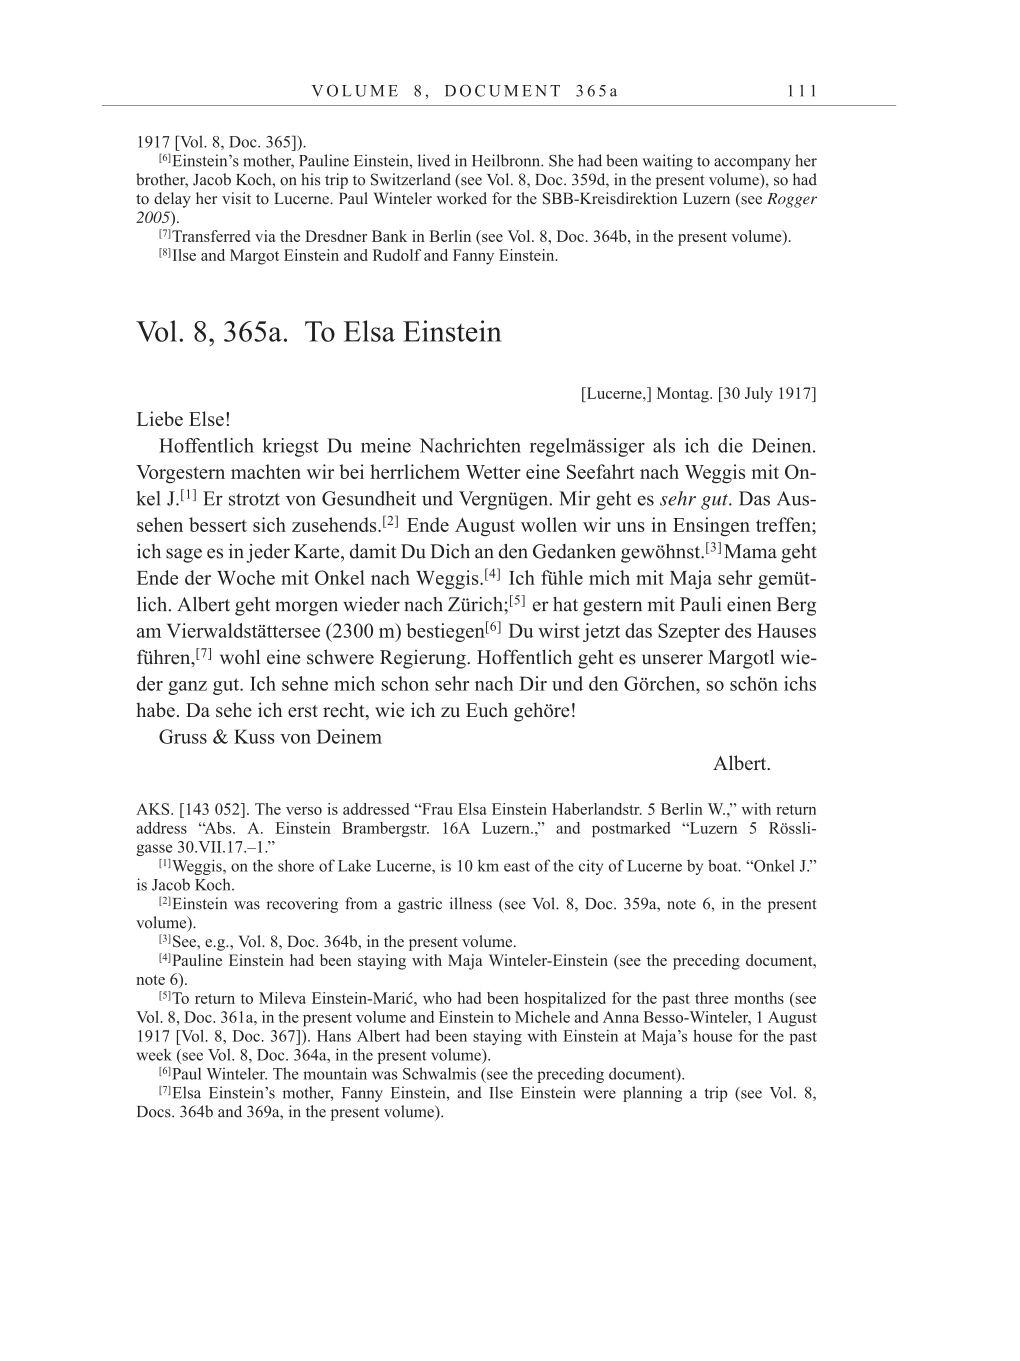 Volume 10: The Berlin Years: Correspondence May-December 1920 / Supplementary Correspondence 1909-1920 page 111